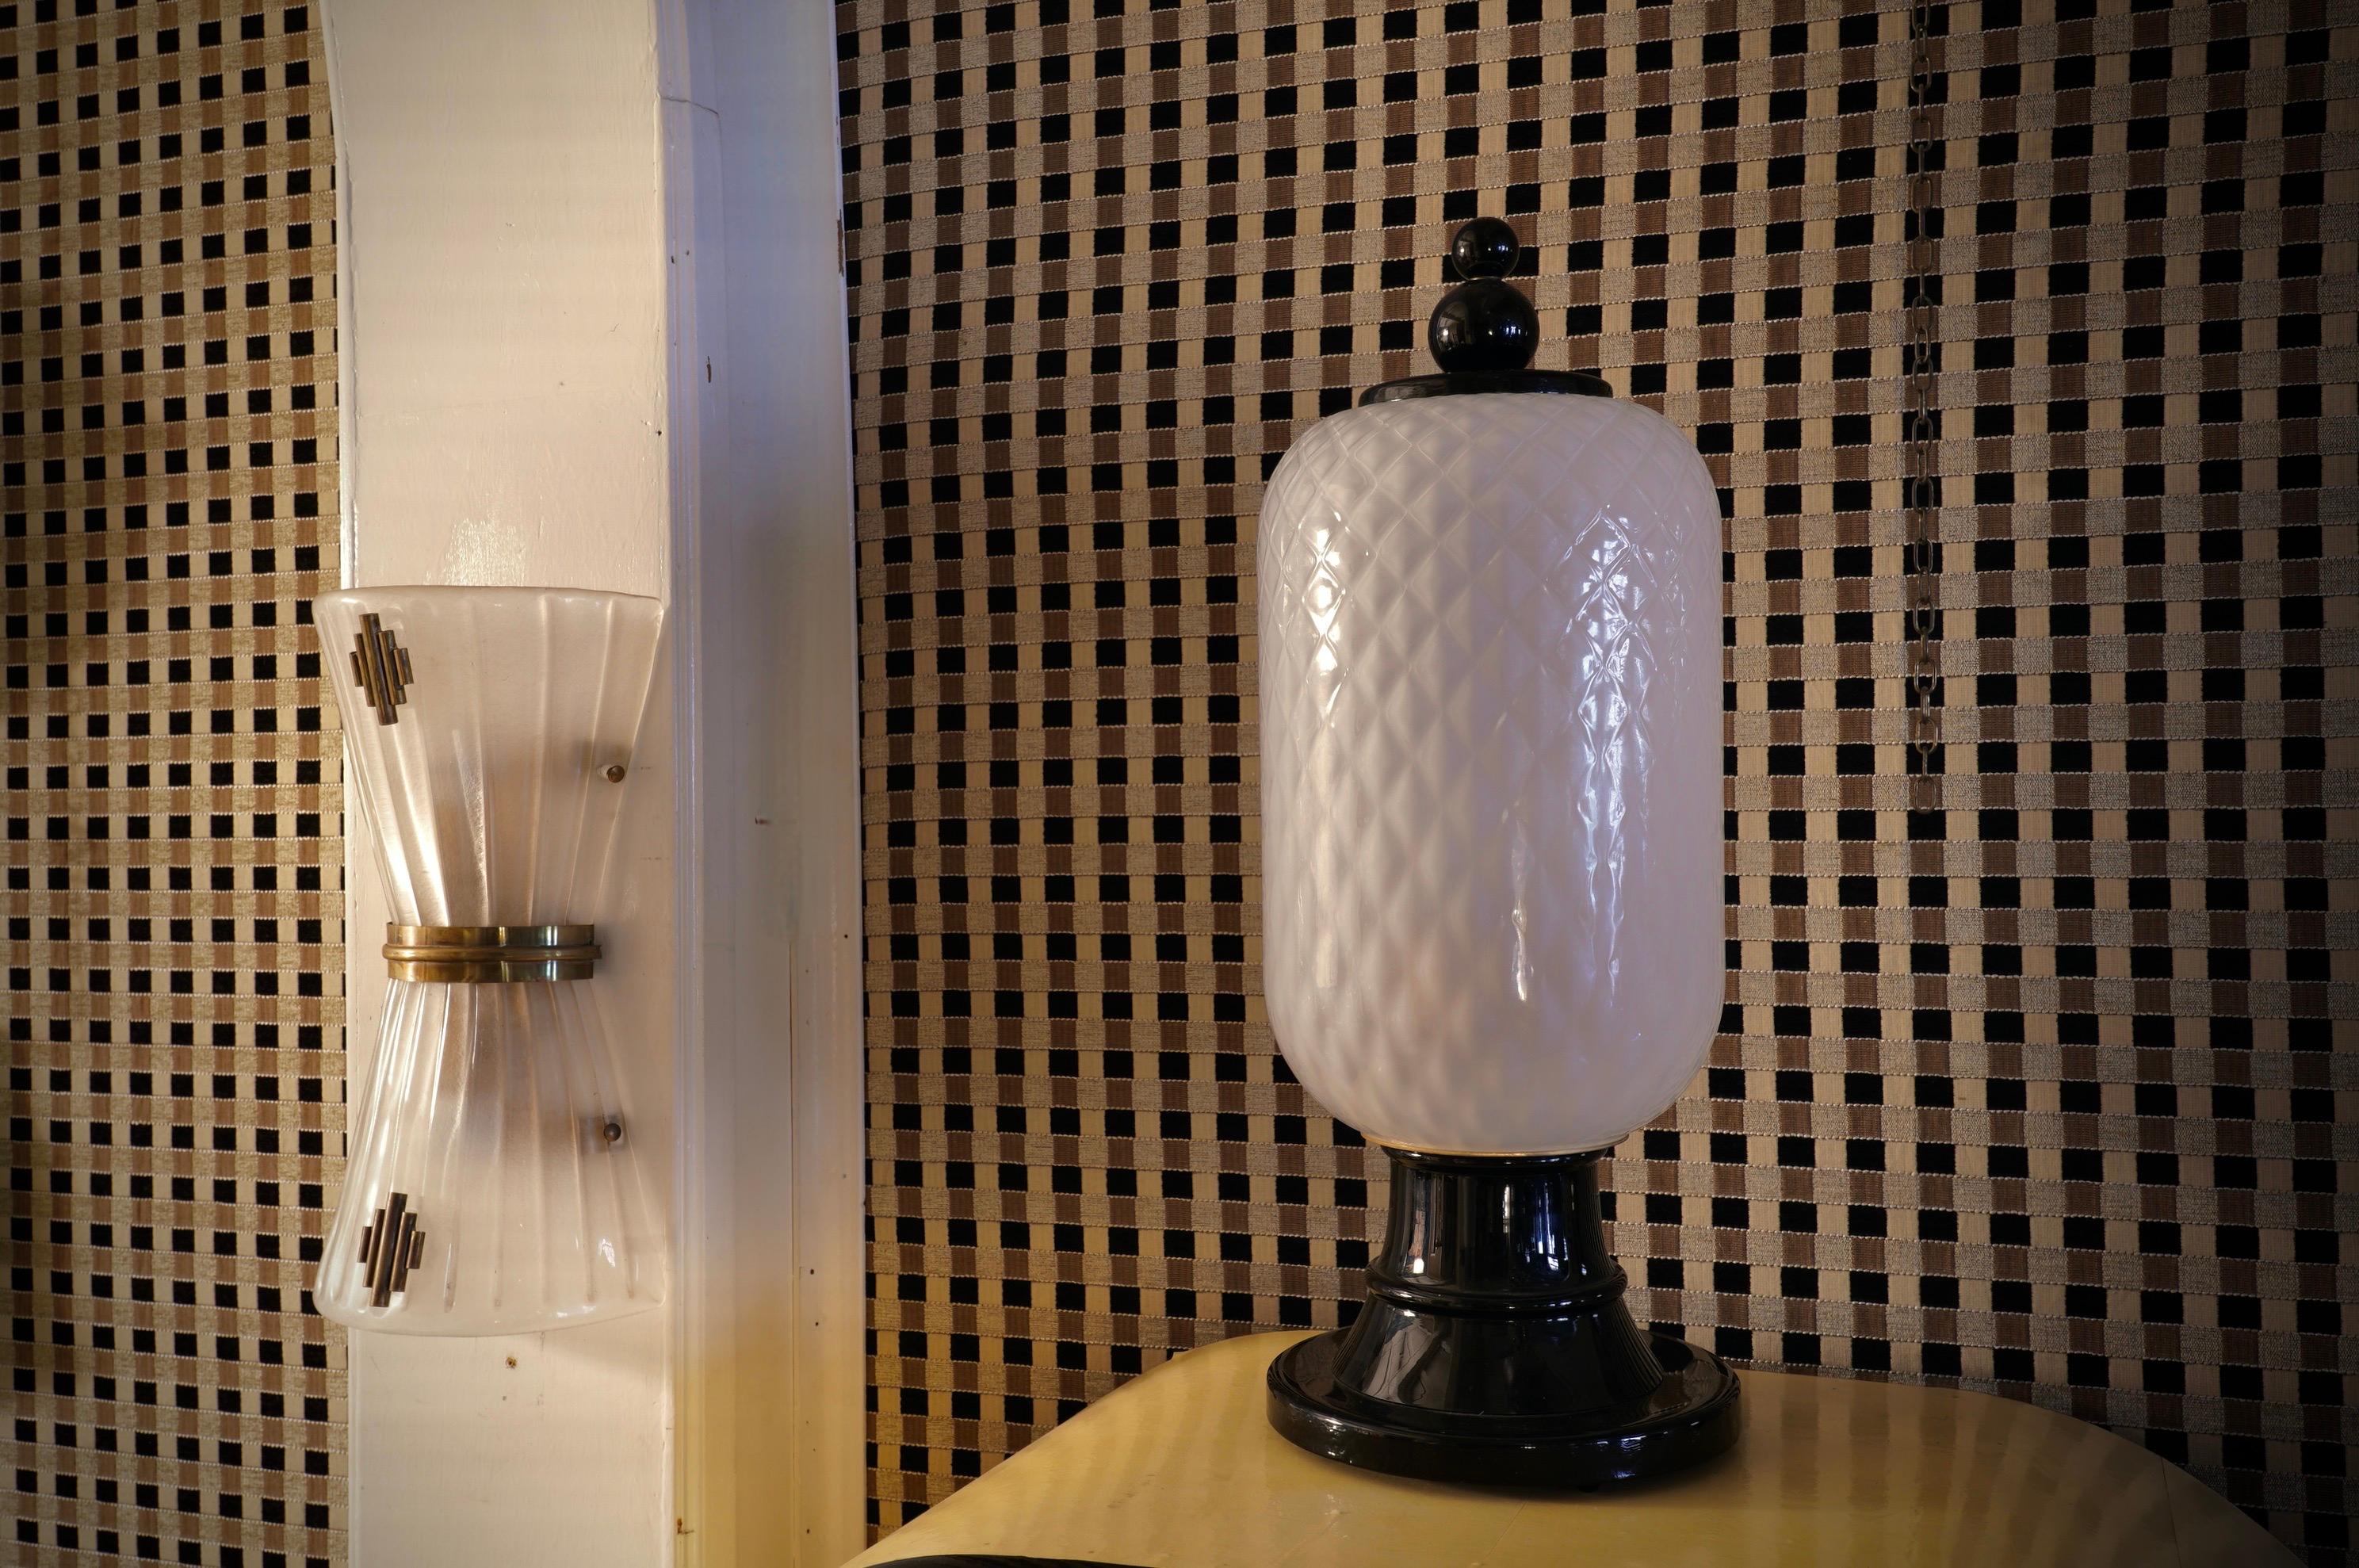 Stunning black and white Murano glass lantern table lamp; The Murano furnaces create an indisputable timeless design, simple but elegant at the same time.

The lamp is made up, starting from the bottom, of a base in black Murano glass with a round